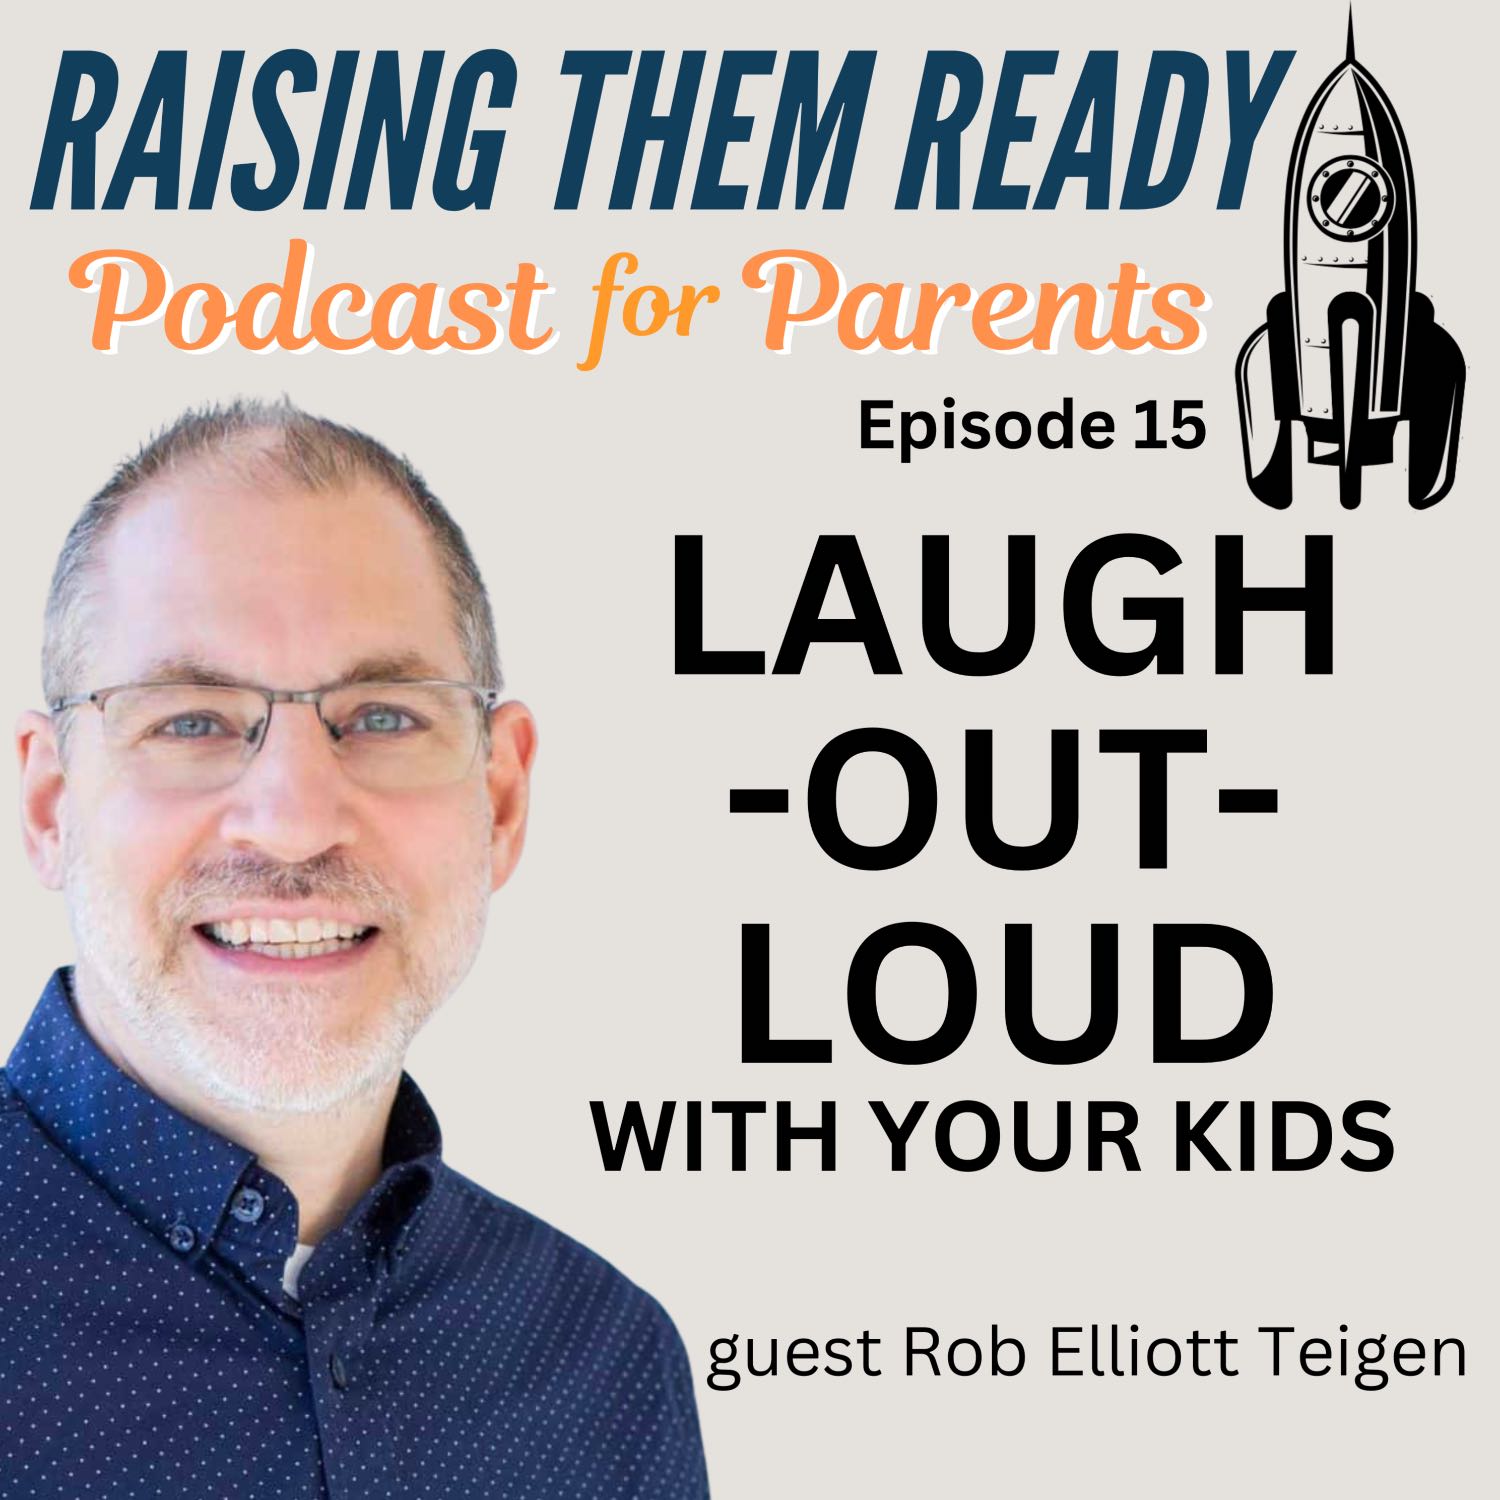 Laugh Out Loud With Your Kids, with guest Rob Elliott Tiegen.